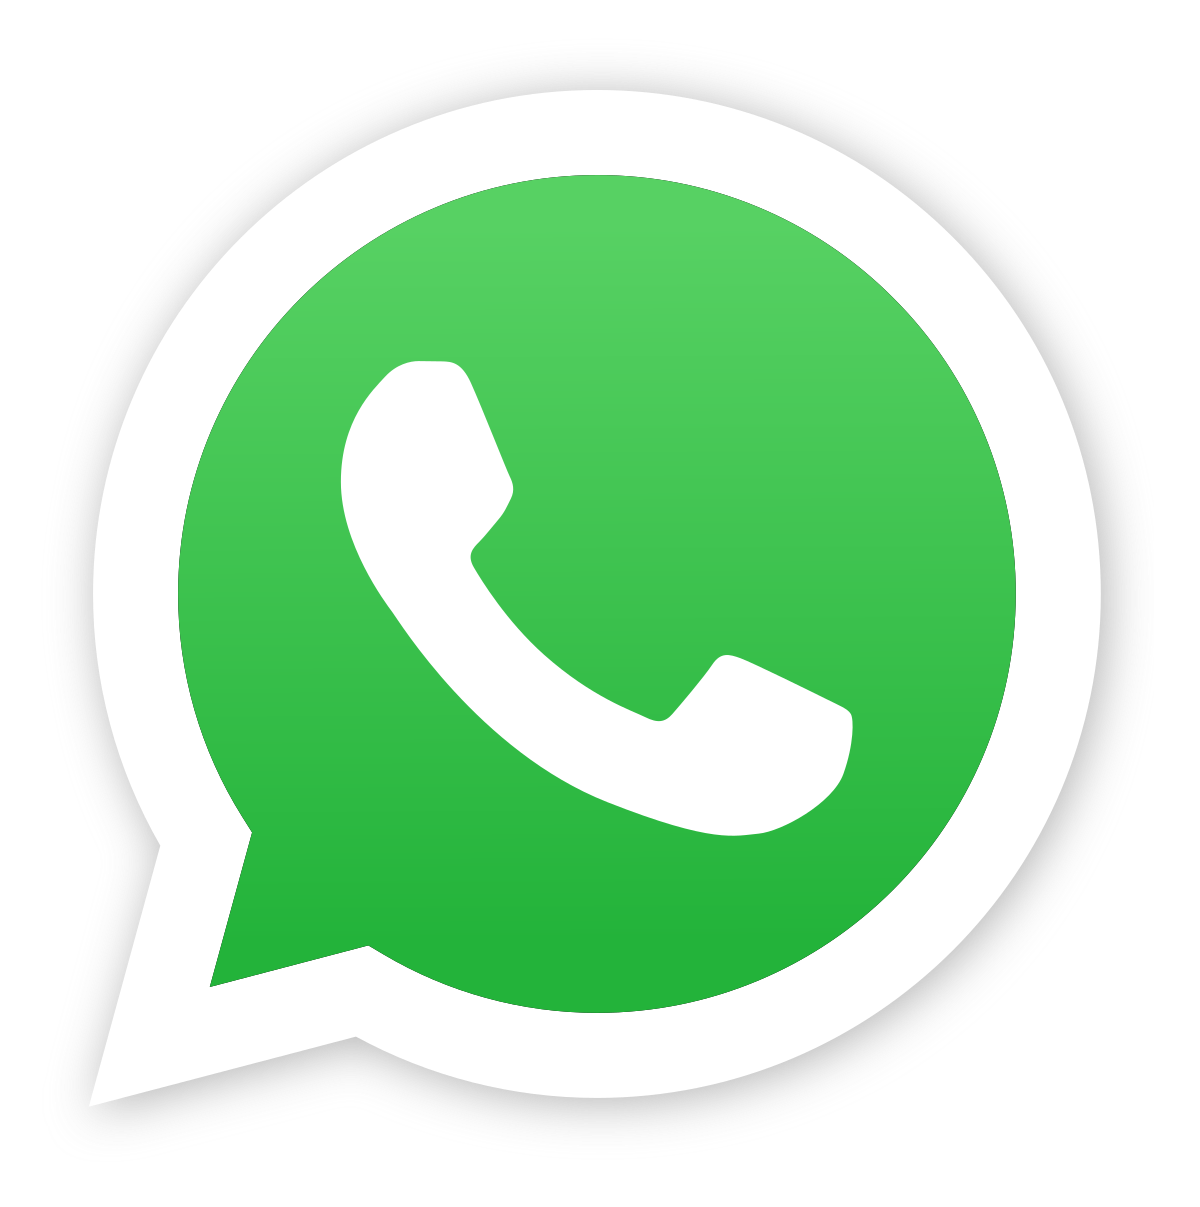 How To Create Whatsapp Channel